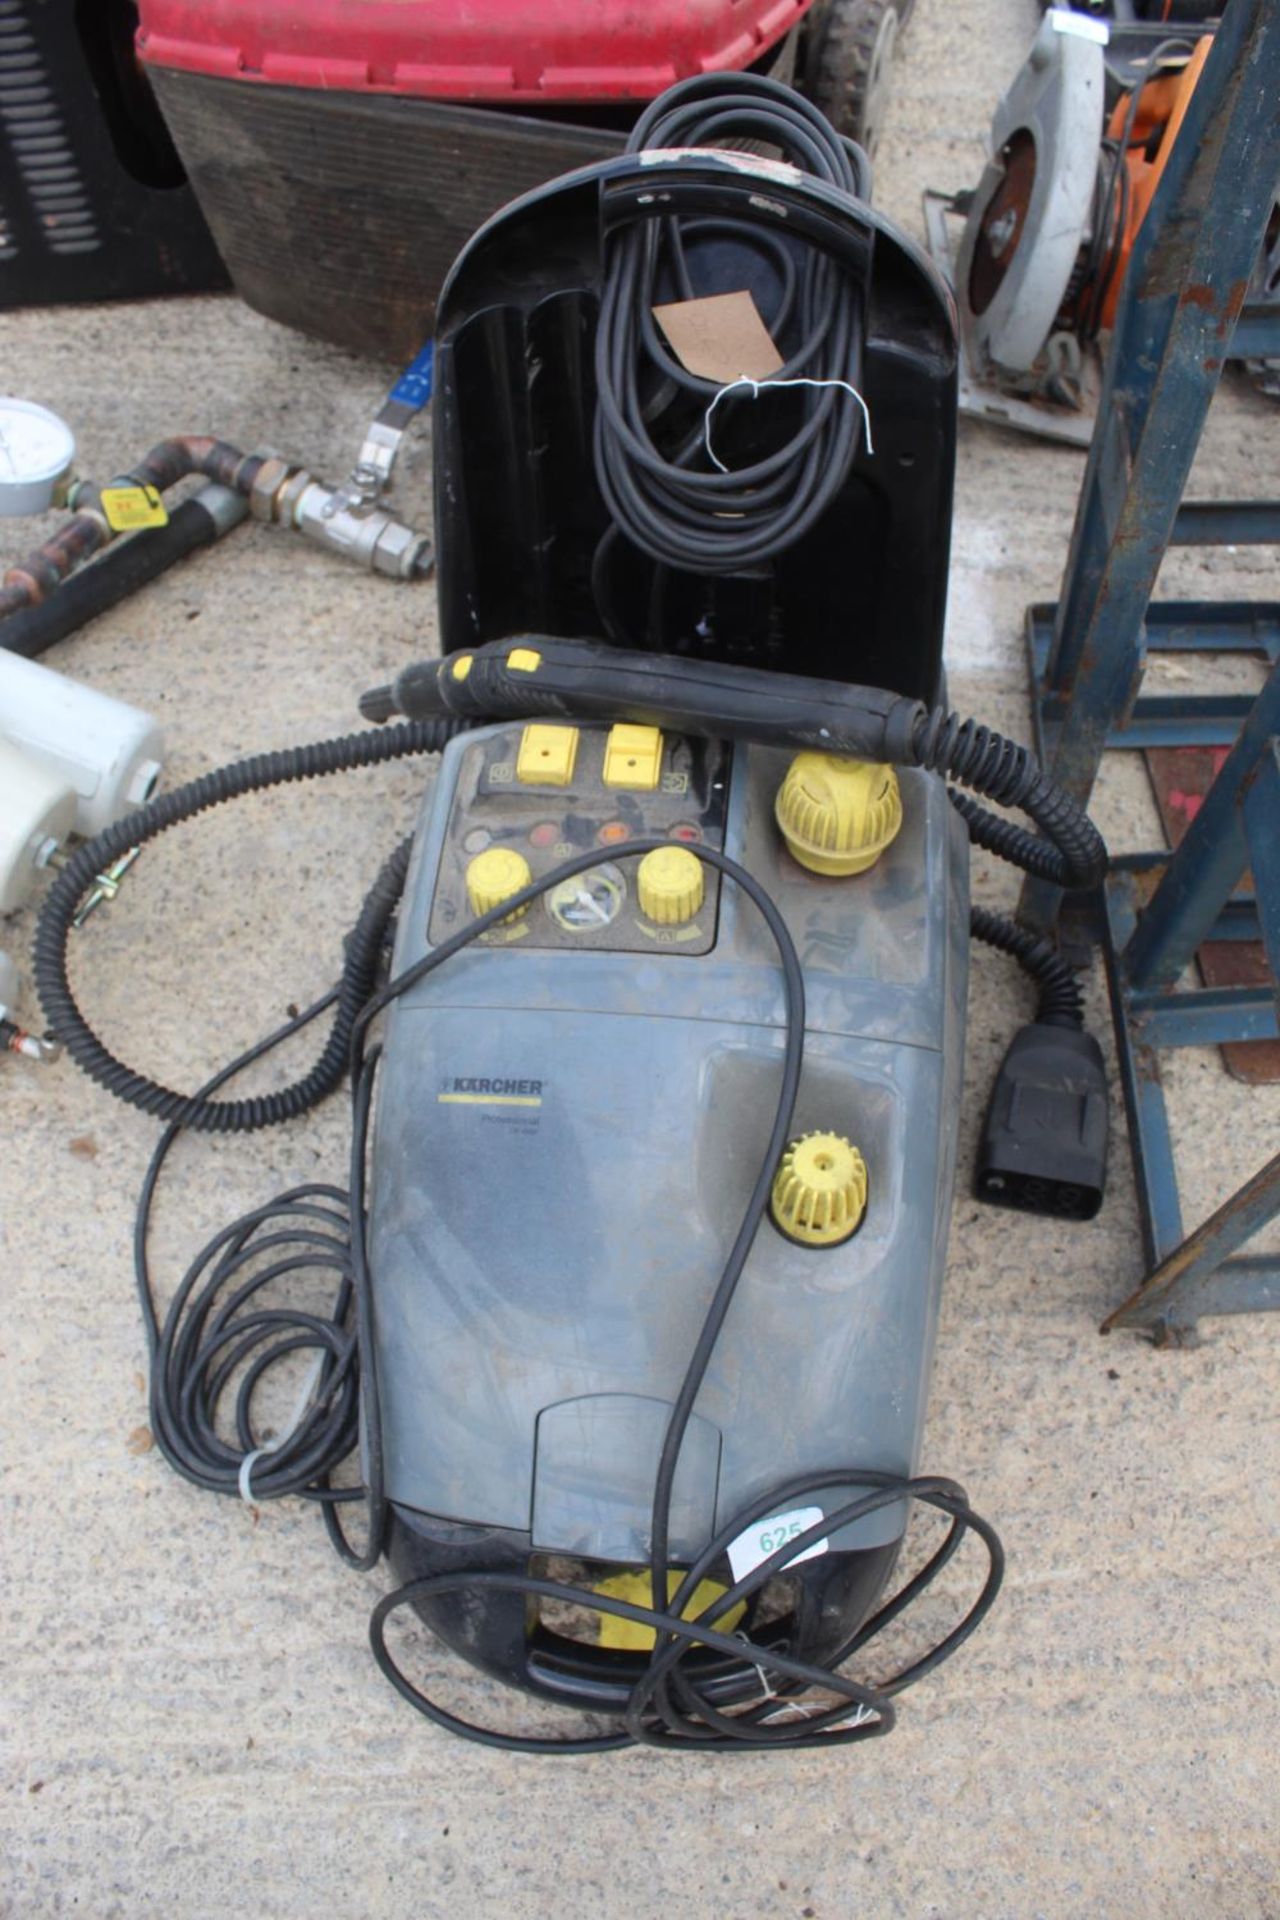 2 KARCHER STEAMERS FOR REPAIRS NO VAT